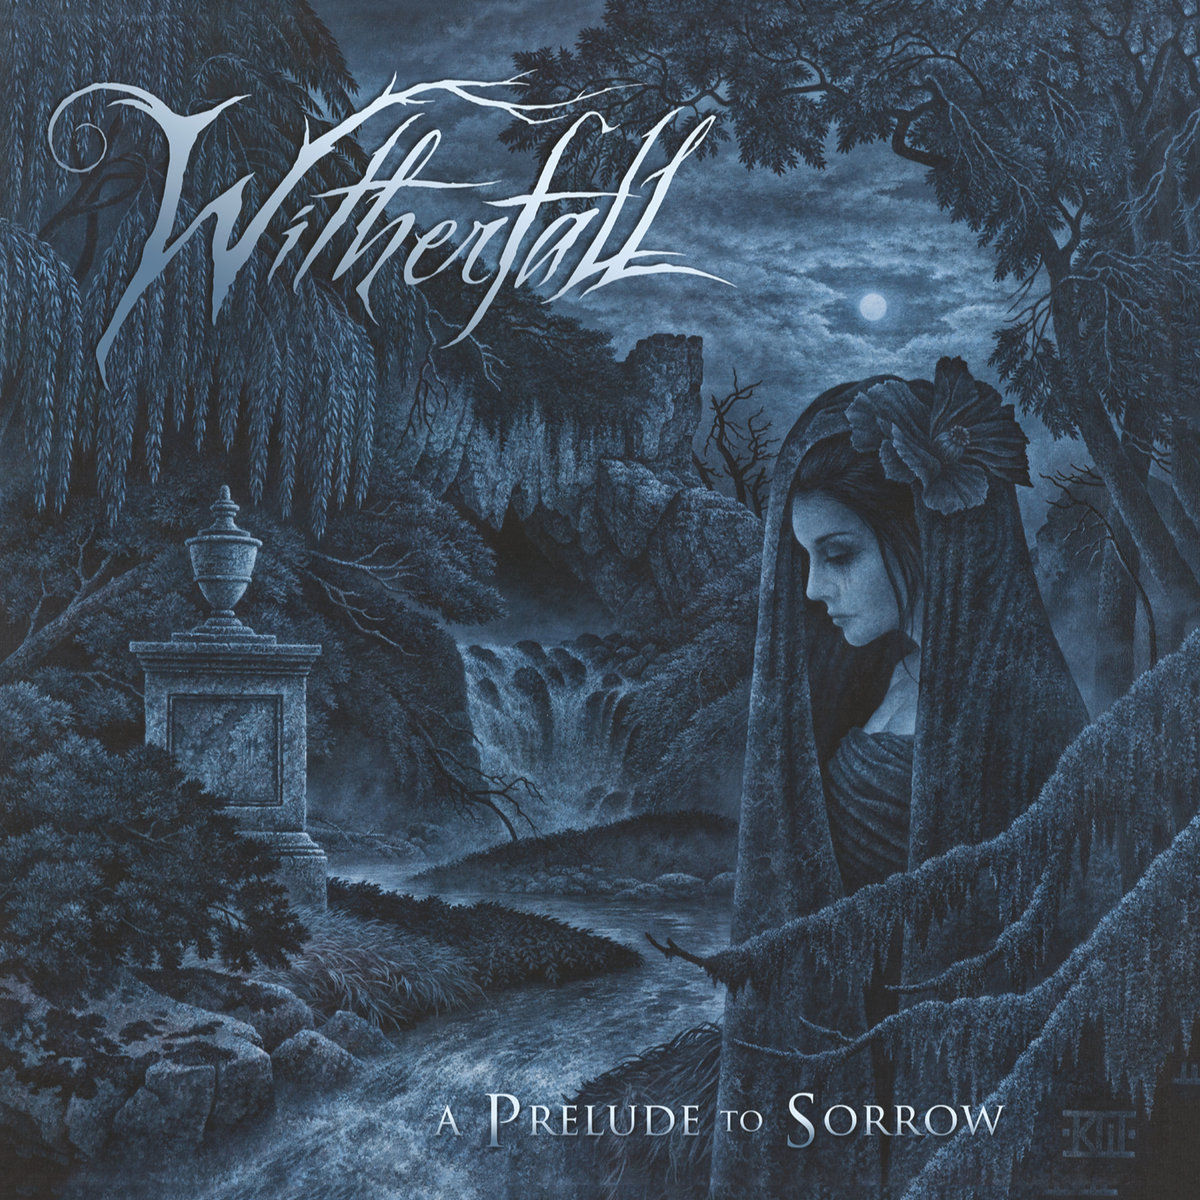 Whitherfall: A Prelude to Sorrow